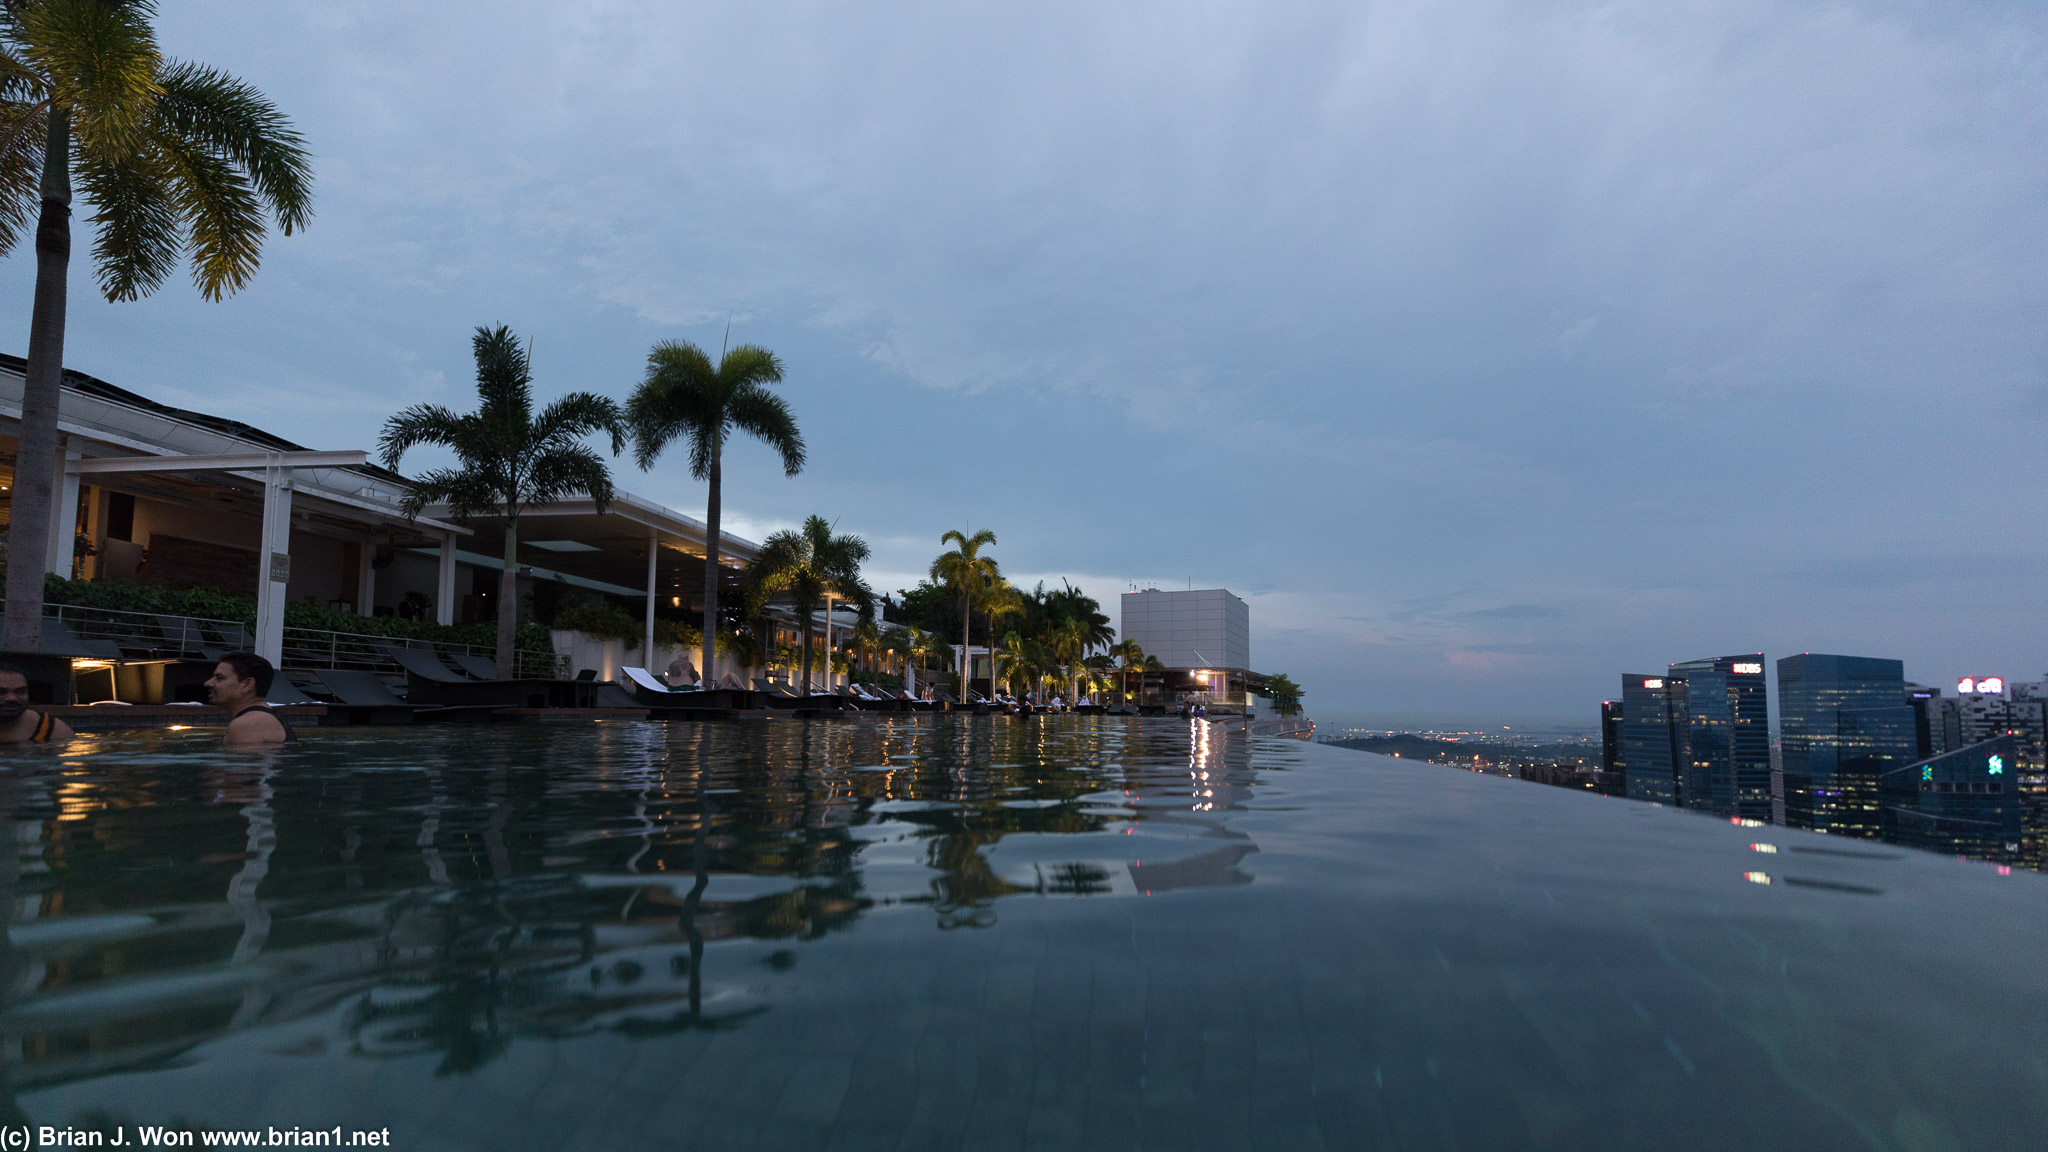 Even at sunrise, the Infinity Pool is already in action.